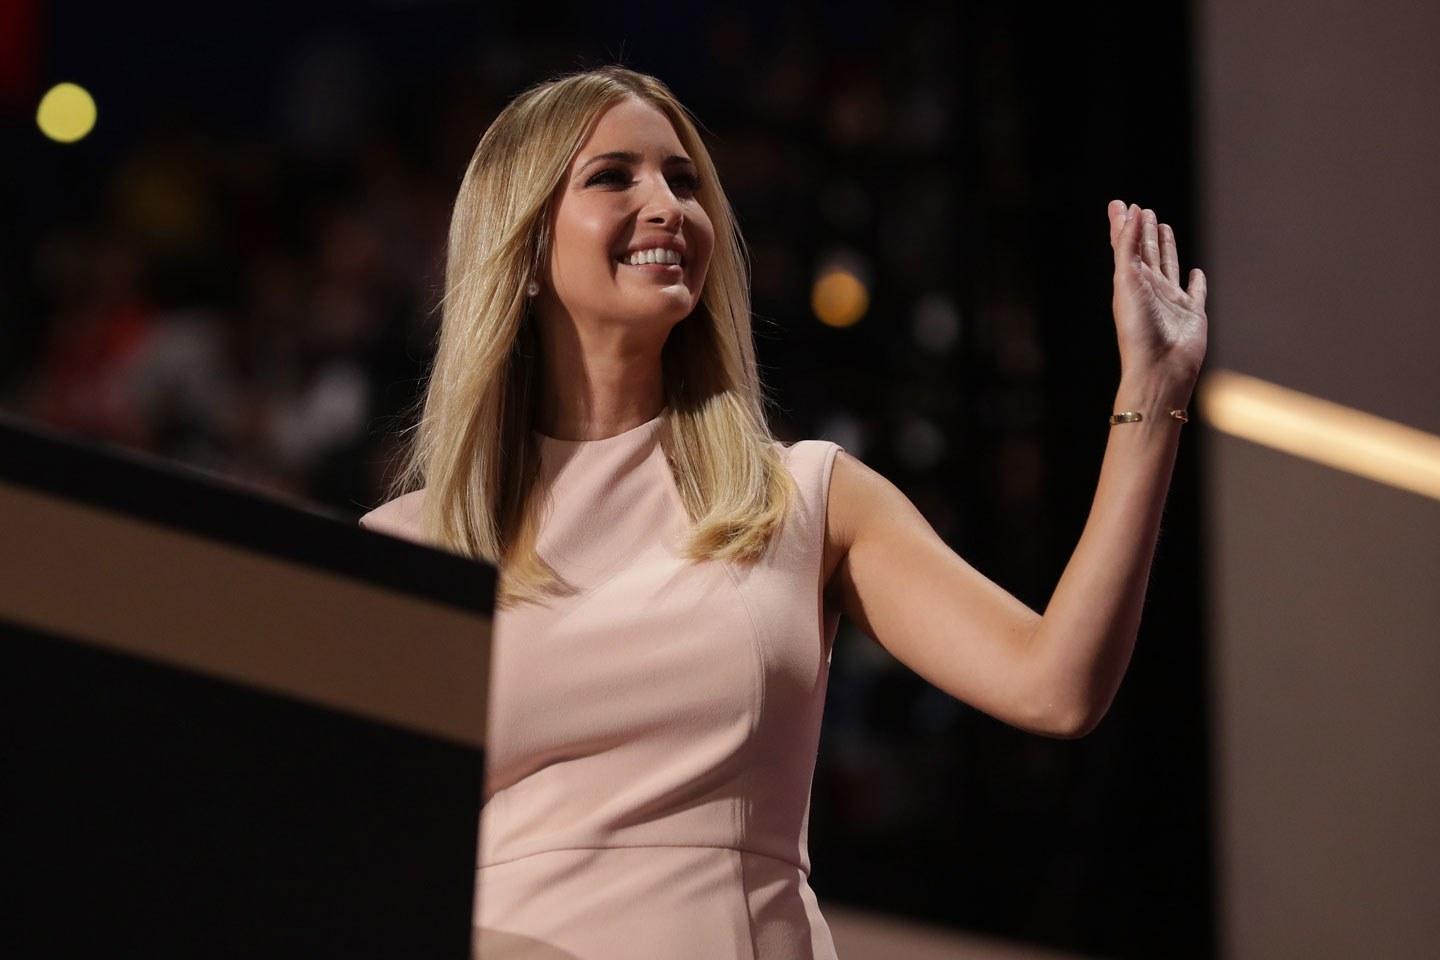 Ivanka+Trump+addresses+the+crowd+at+the+2016+Republican+National+Convention%2C+where+she+delivered+more+liberal+ideas+which+rounded+out+the+more+conservative+ones+of+her+father%2C+Donald+Trump.